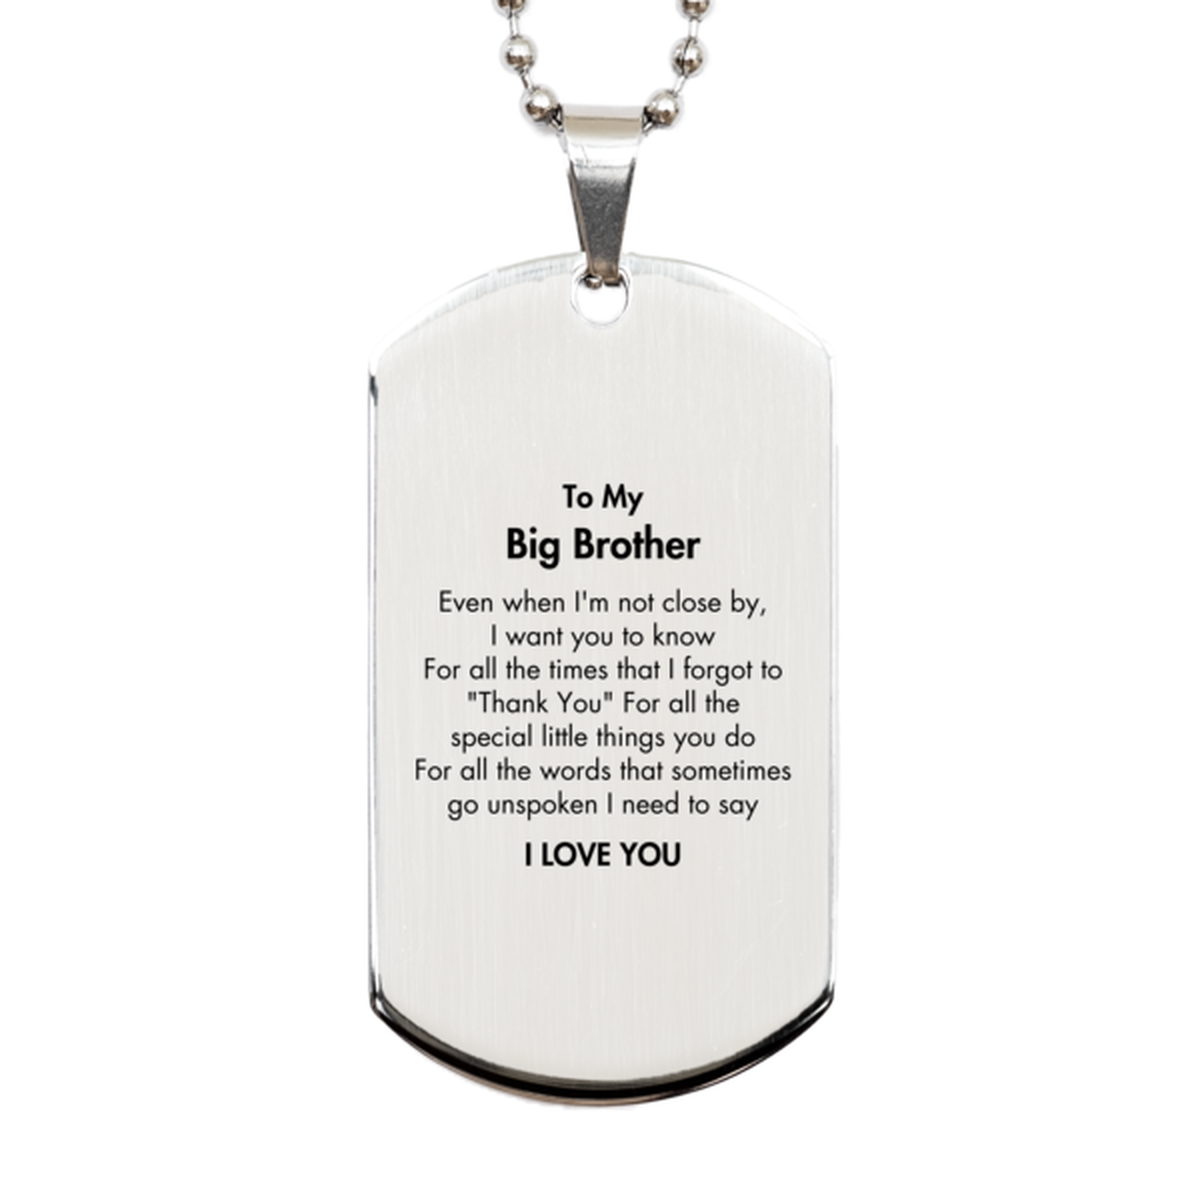 Thank You Gifts for Big Brother, Keepsake Silver Dog Tag Gifts for Big Brother Birthday Mother's day Father's Day Big Brother For all the words That sometimes go unspoken I need to say I LOVE YOU